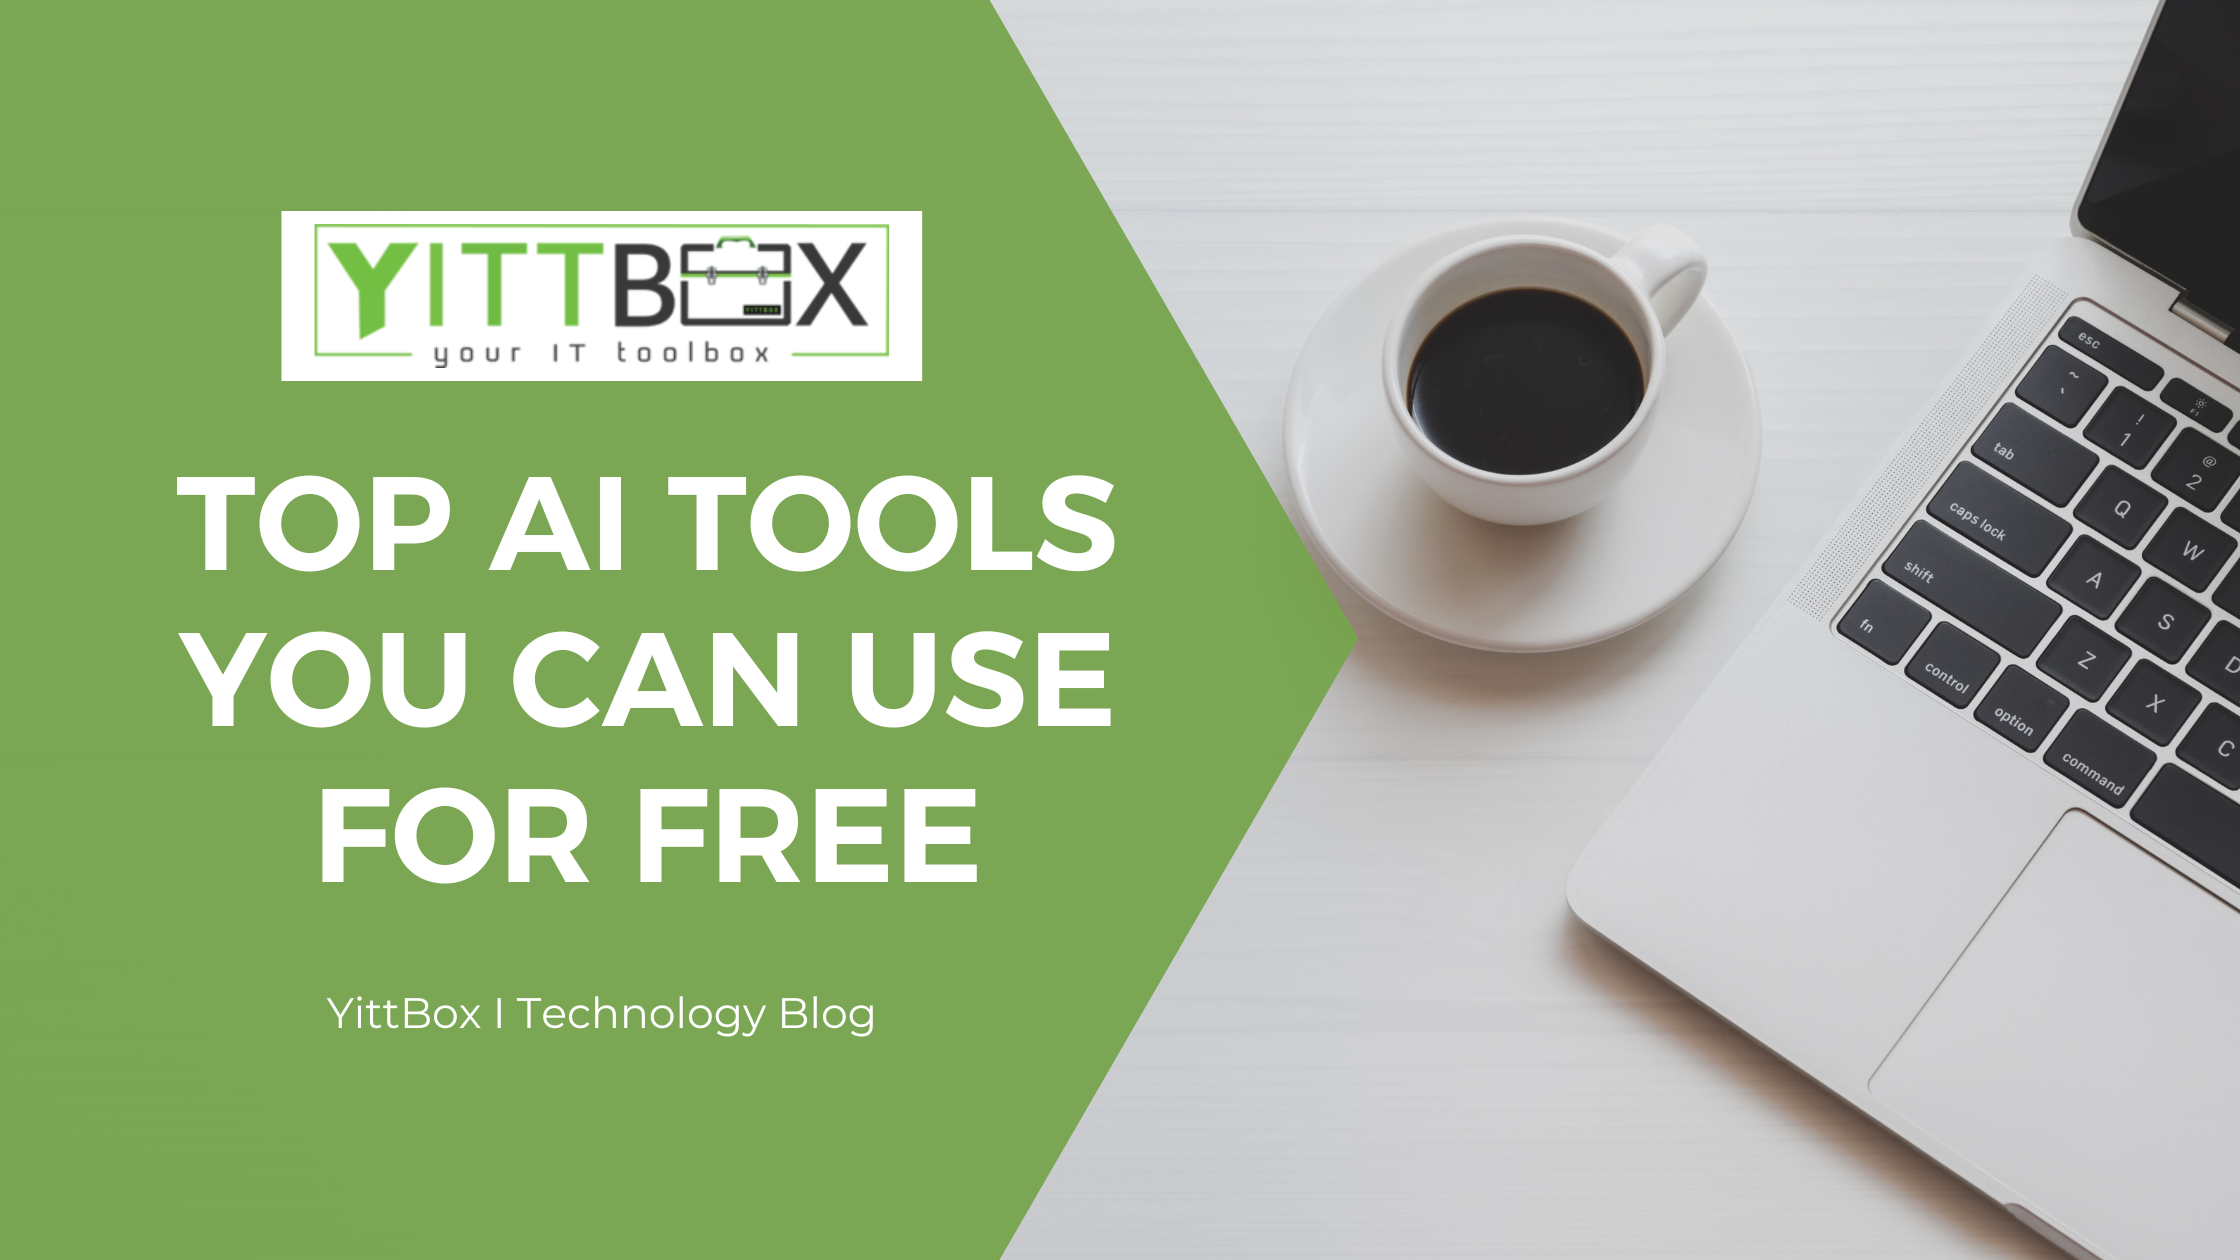 Top AI tools you can use for free